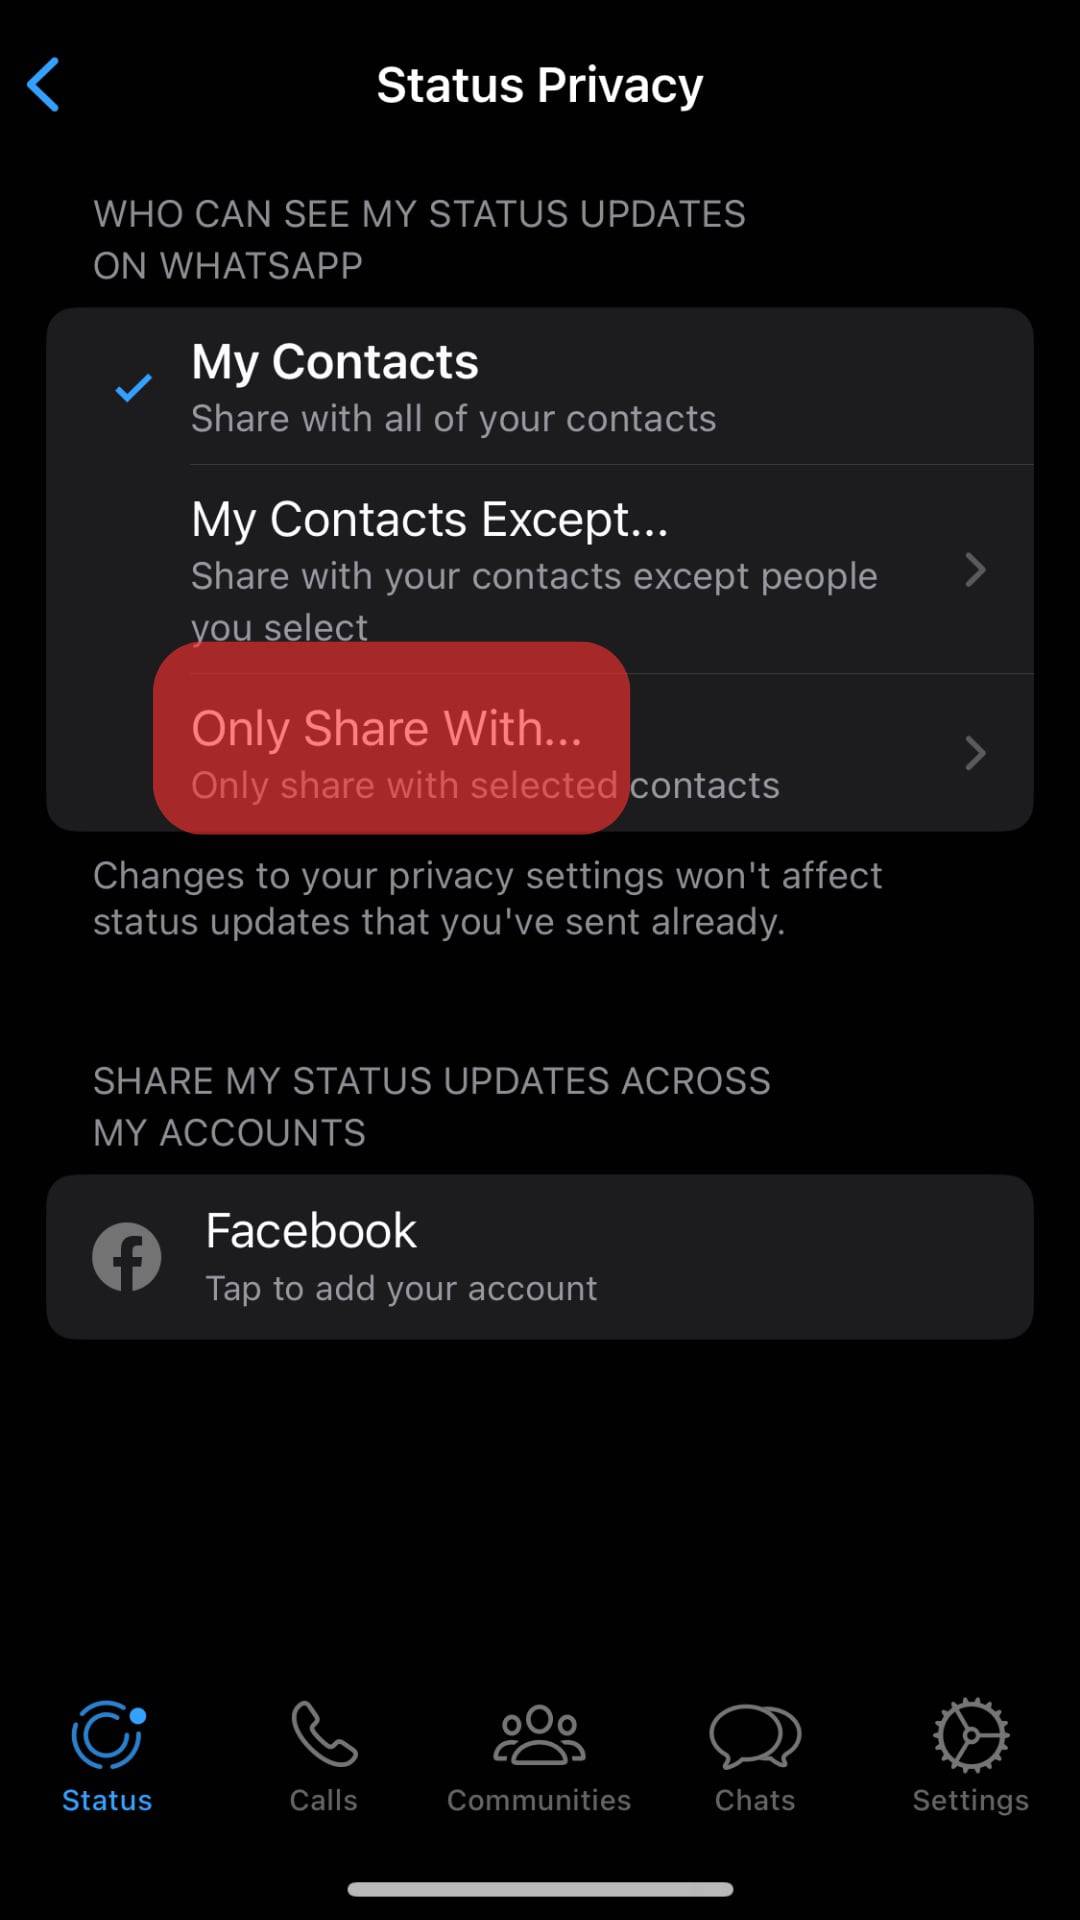 Tap The Only Share With... Option.